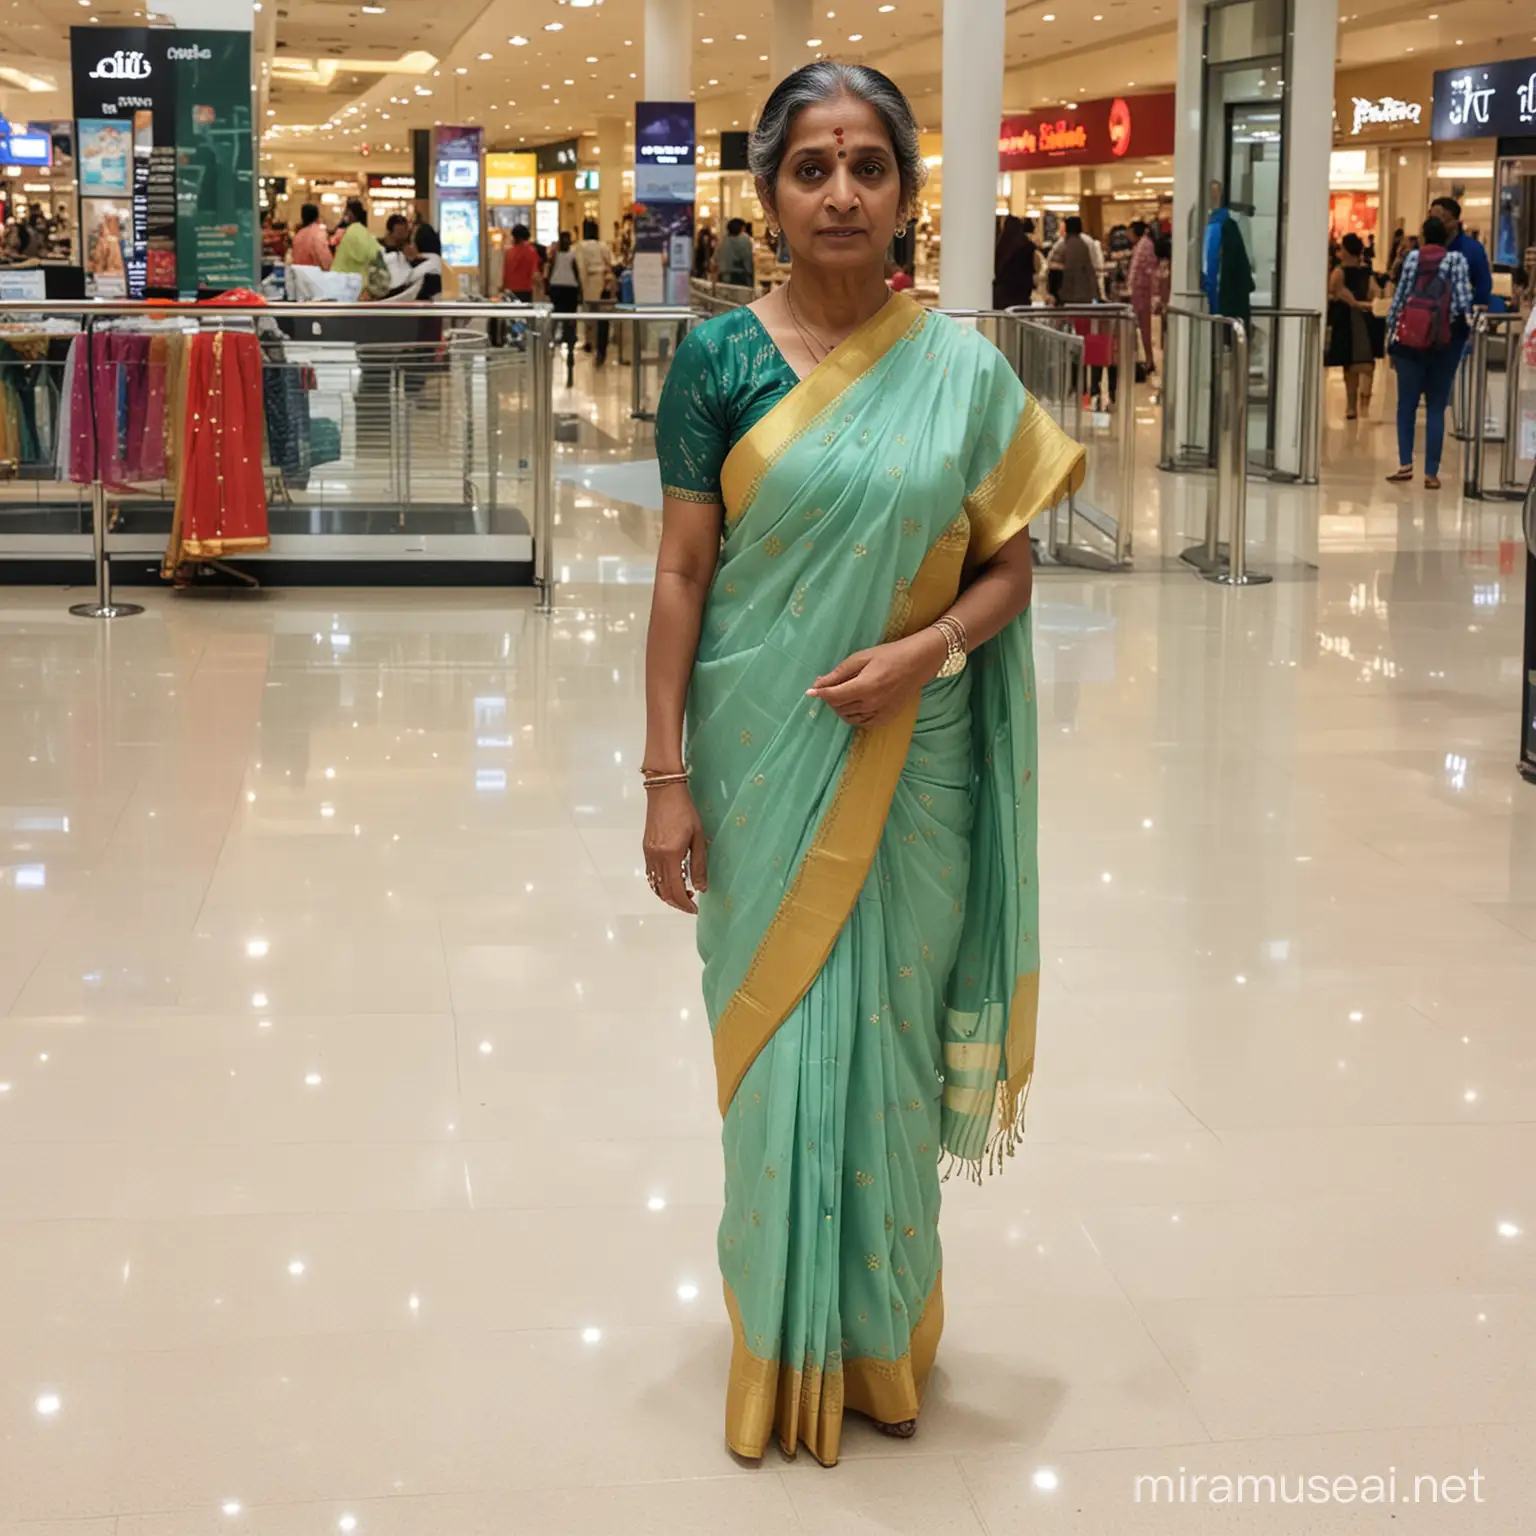 Indian 50 years old lady walking in a mall. she is wearing saree and seems so tired